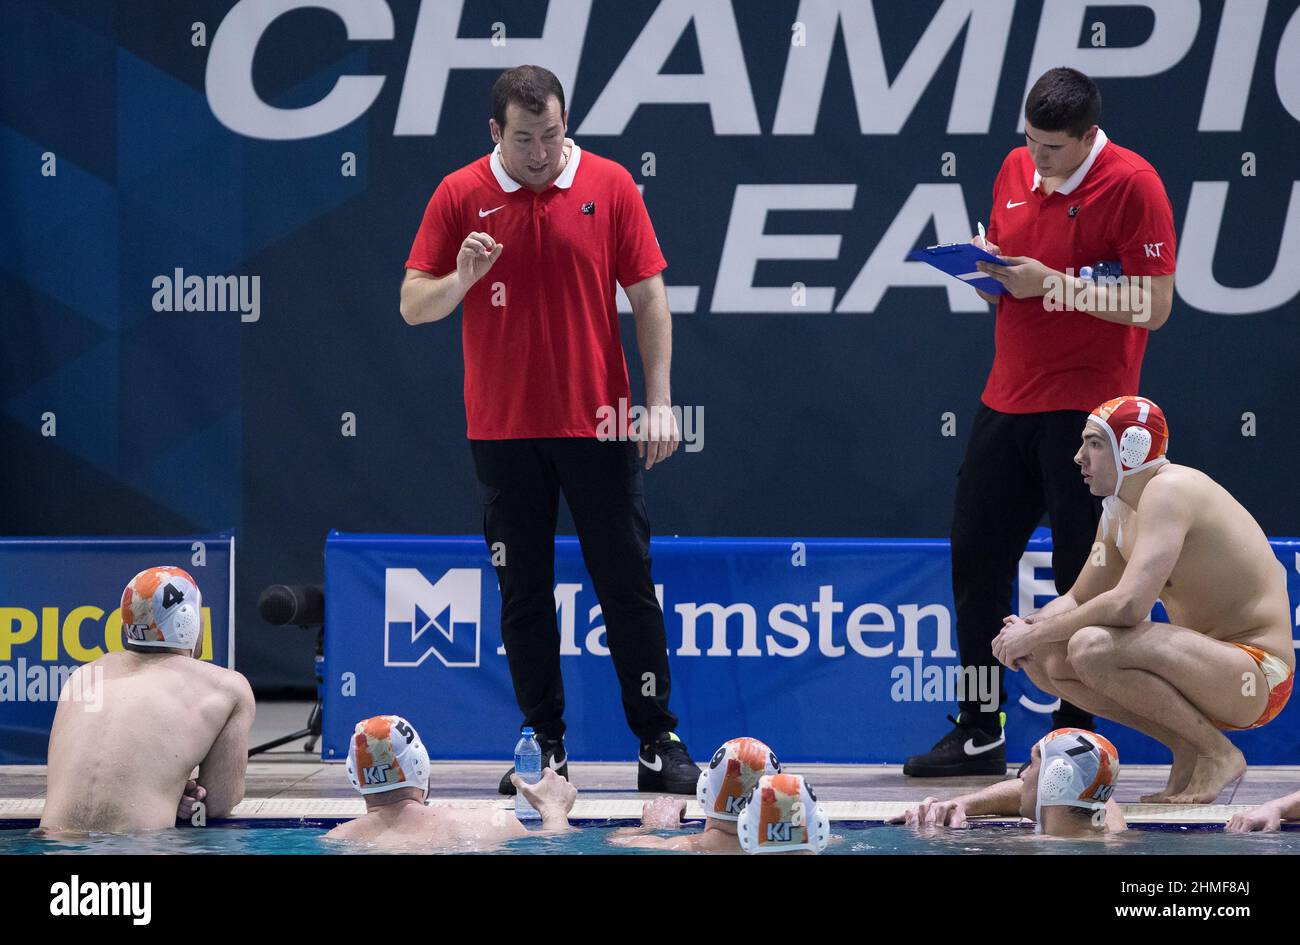 Radnicki and Steaua have Champions League wild cards - Total Waterpolo